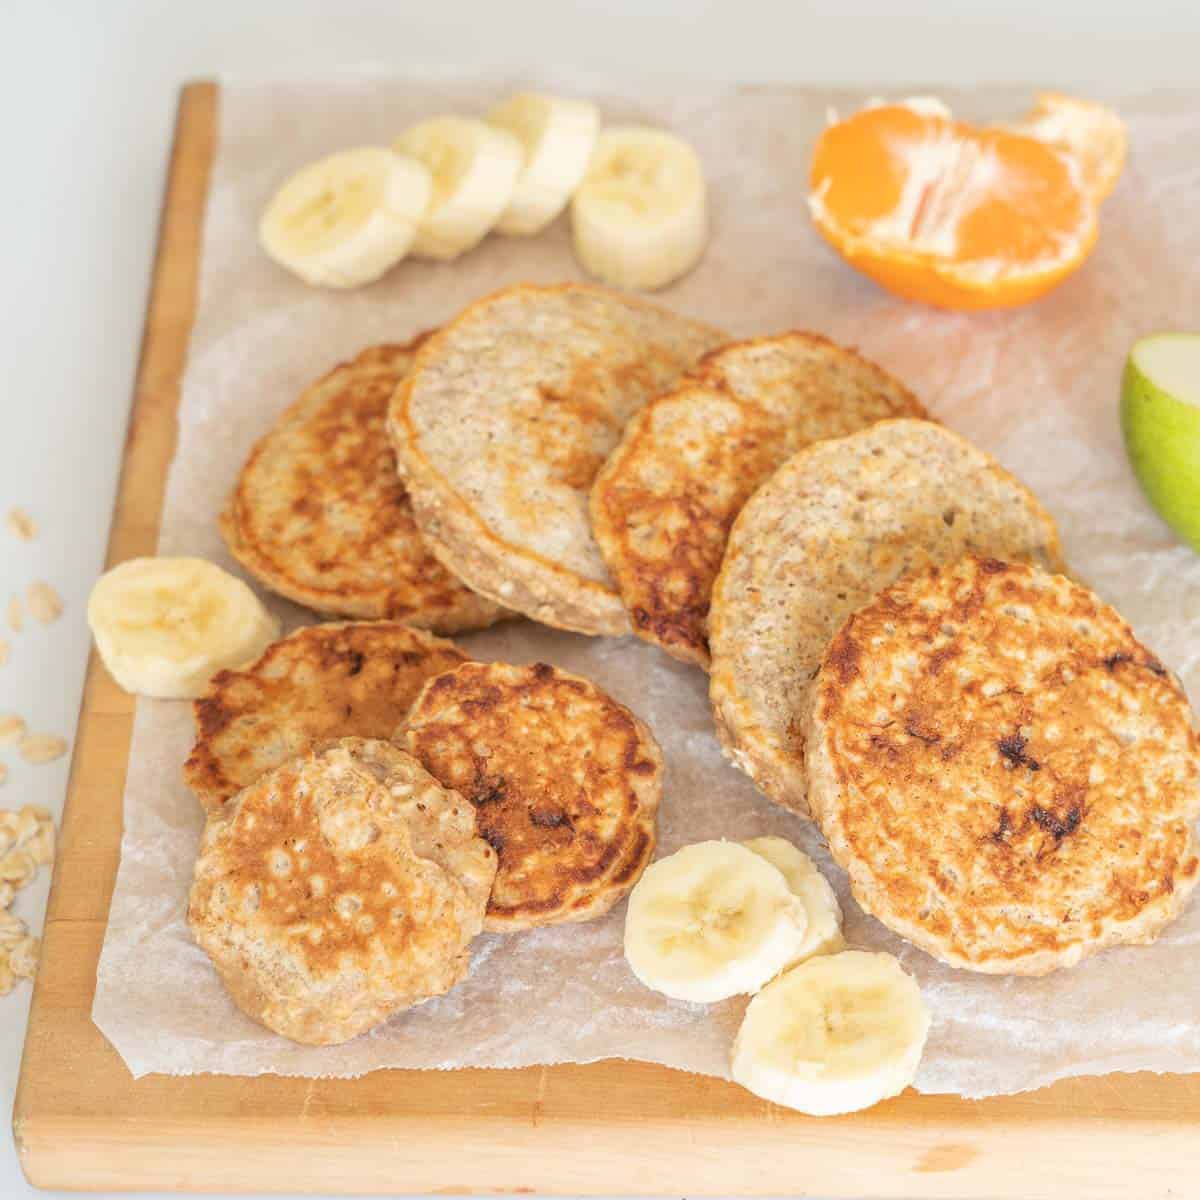 large and small banana pikelets on a wooden chopping board with cut fruit.